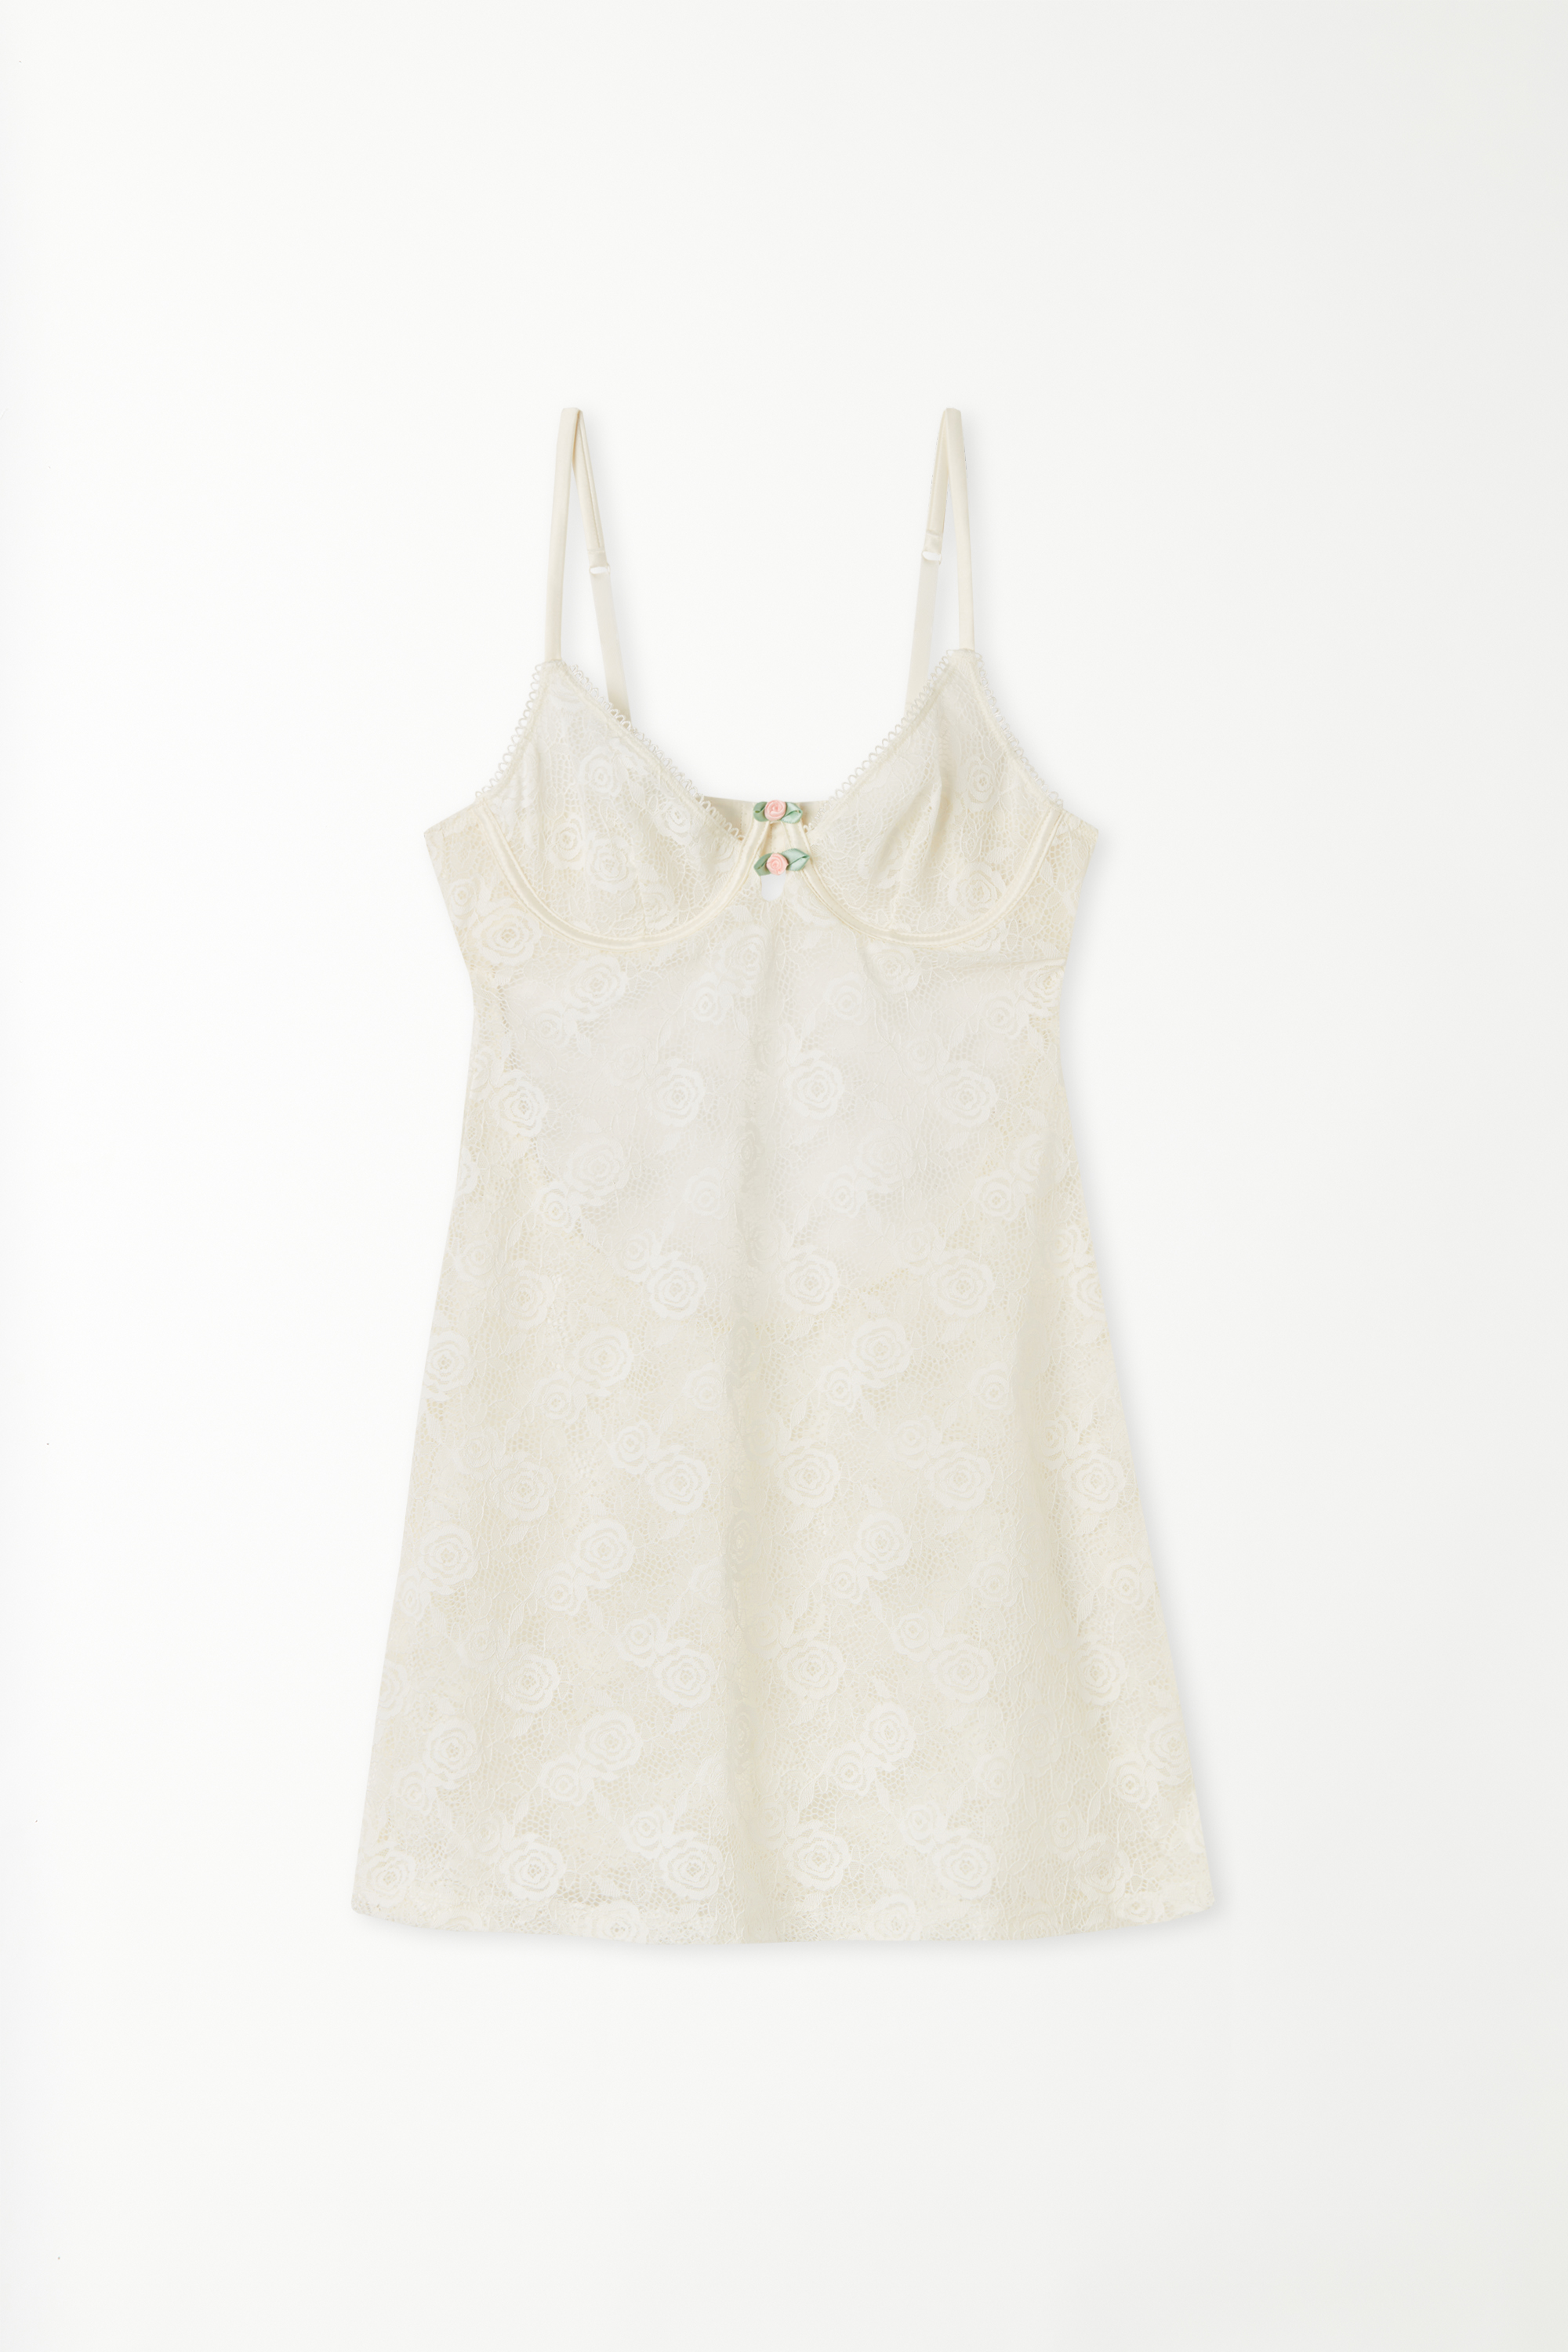 Milk Roses Lace Chemise with Balconette Cups